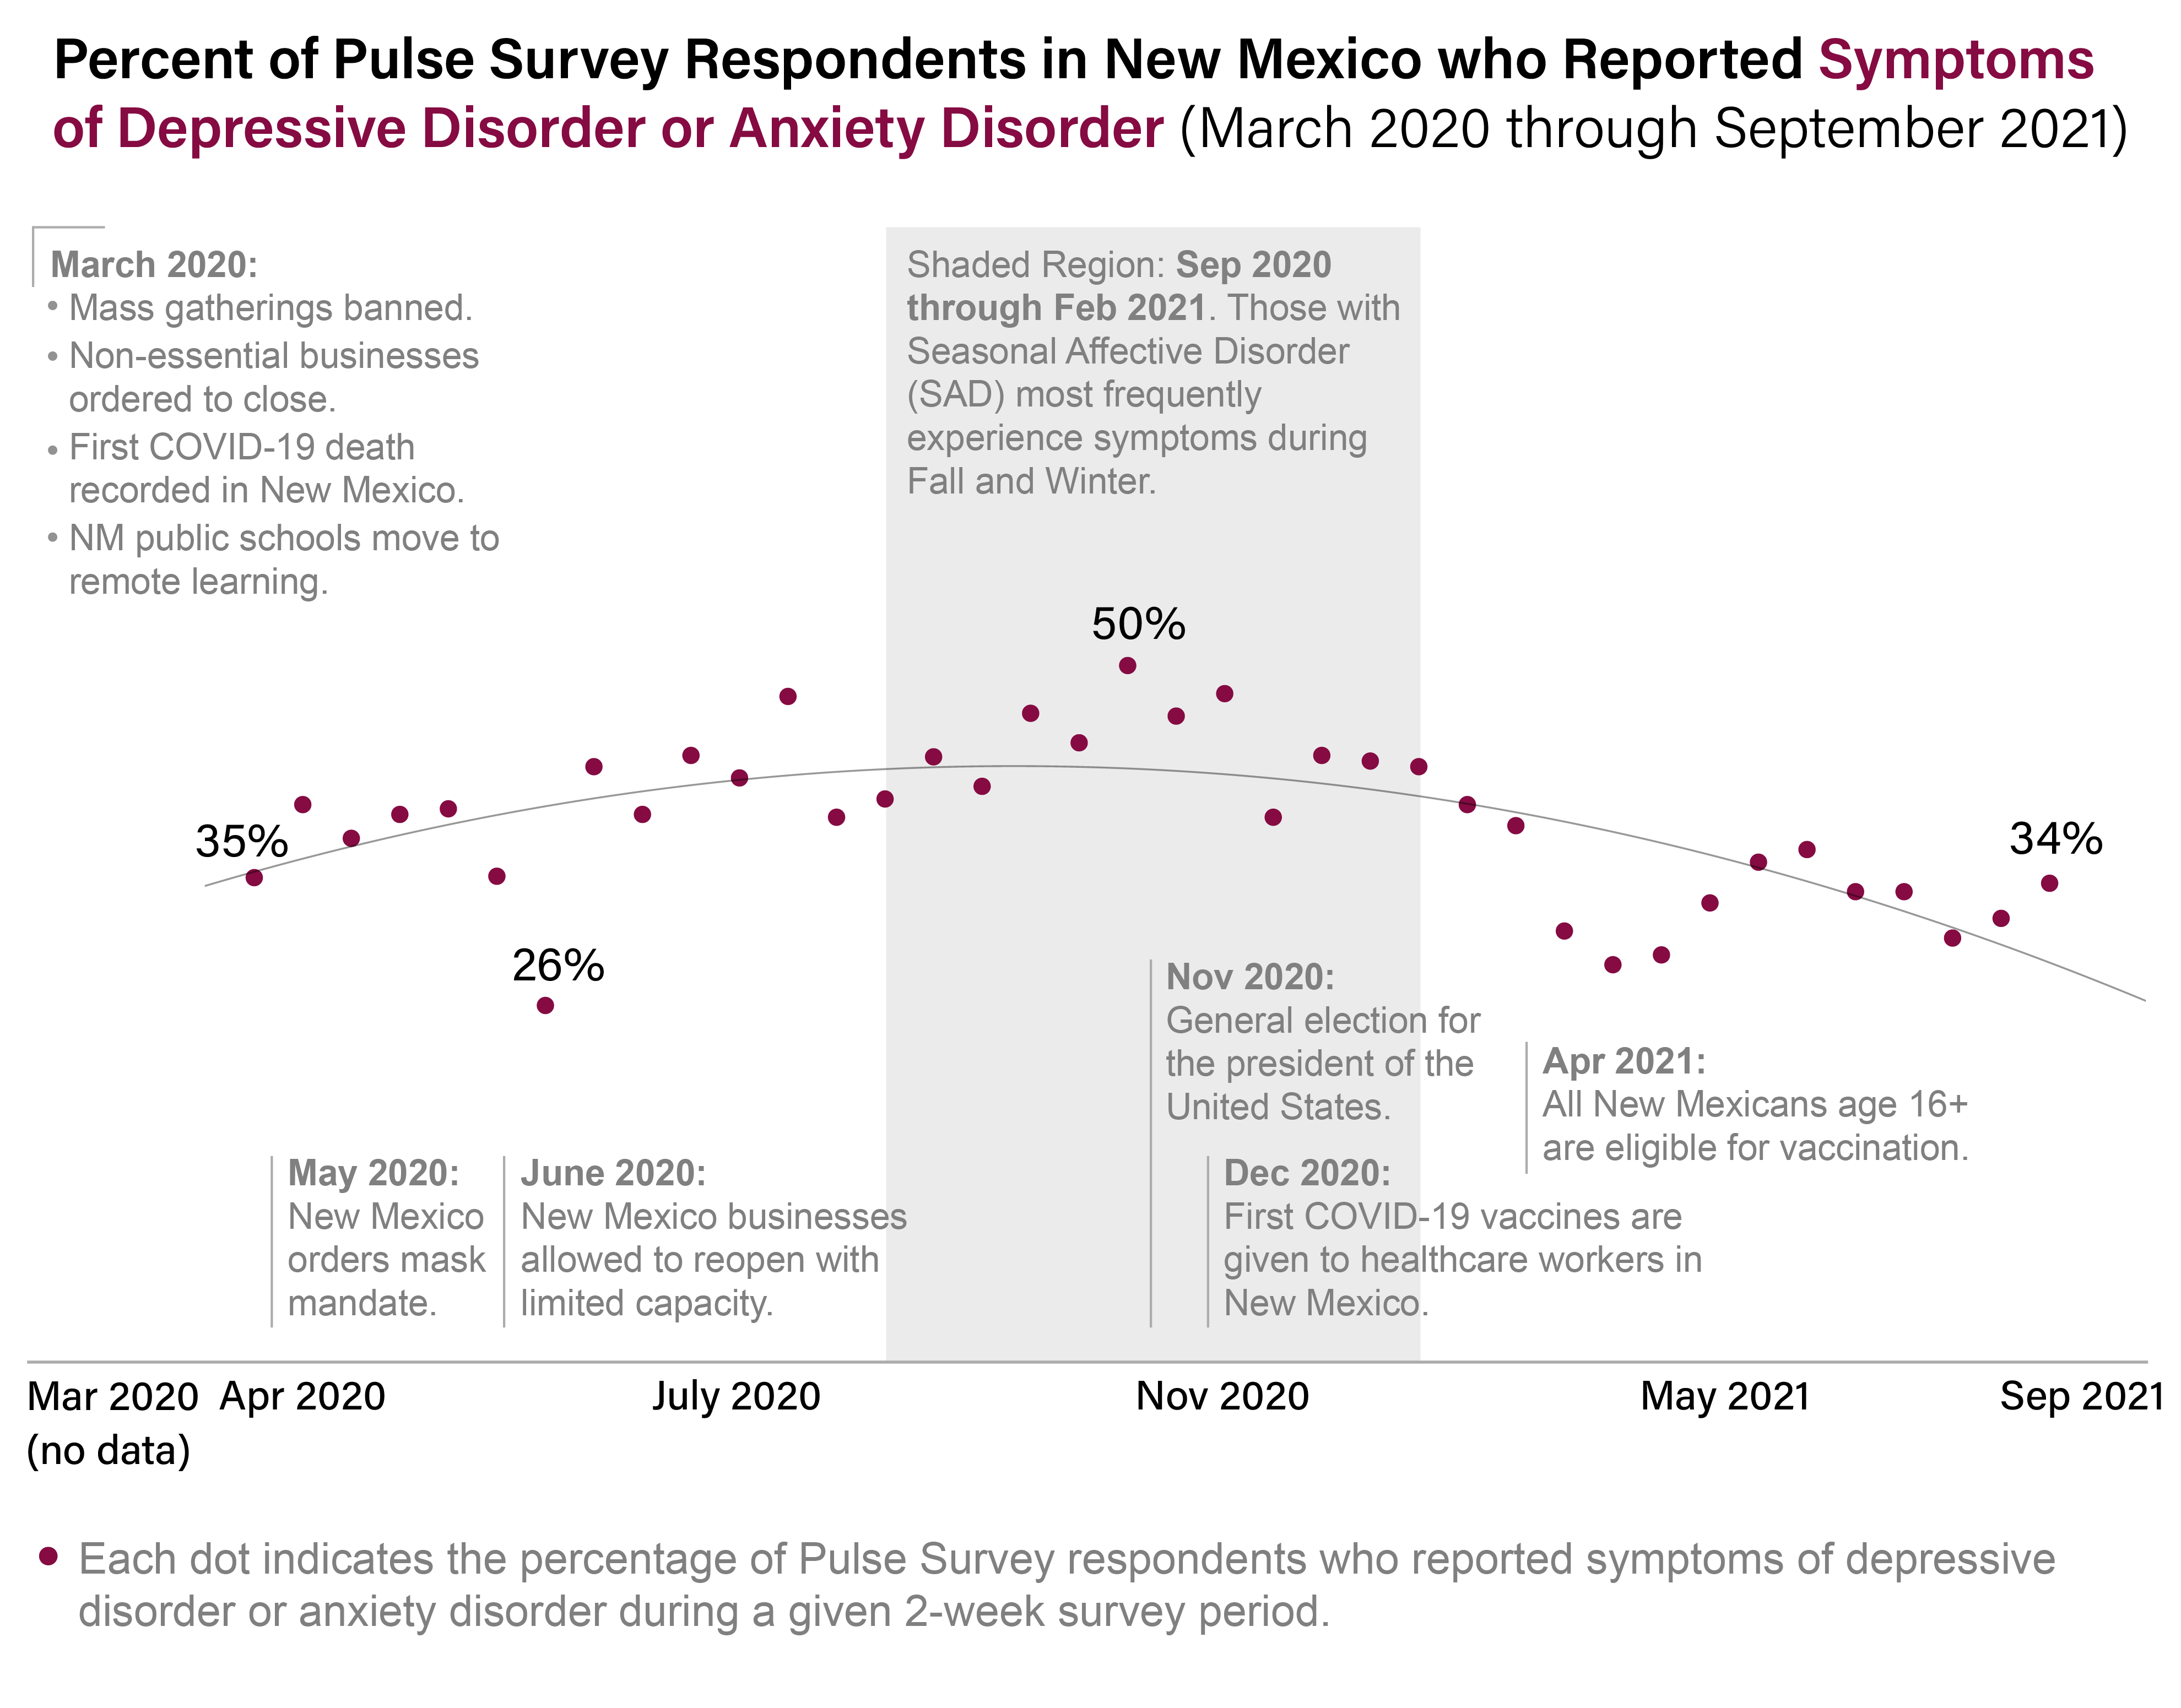 Pulse Survey Responses from New Mexicans: At the end of April 2020, 35% of New Mexicans reported symptoms of depressive disorder or anxiety disorder. By November 2020, the number had peaked at 50%. As of September 2021, the number of New Mexicans reporting symptoms was back down to 34%.